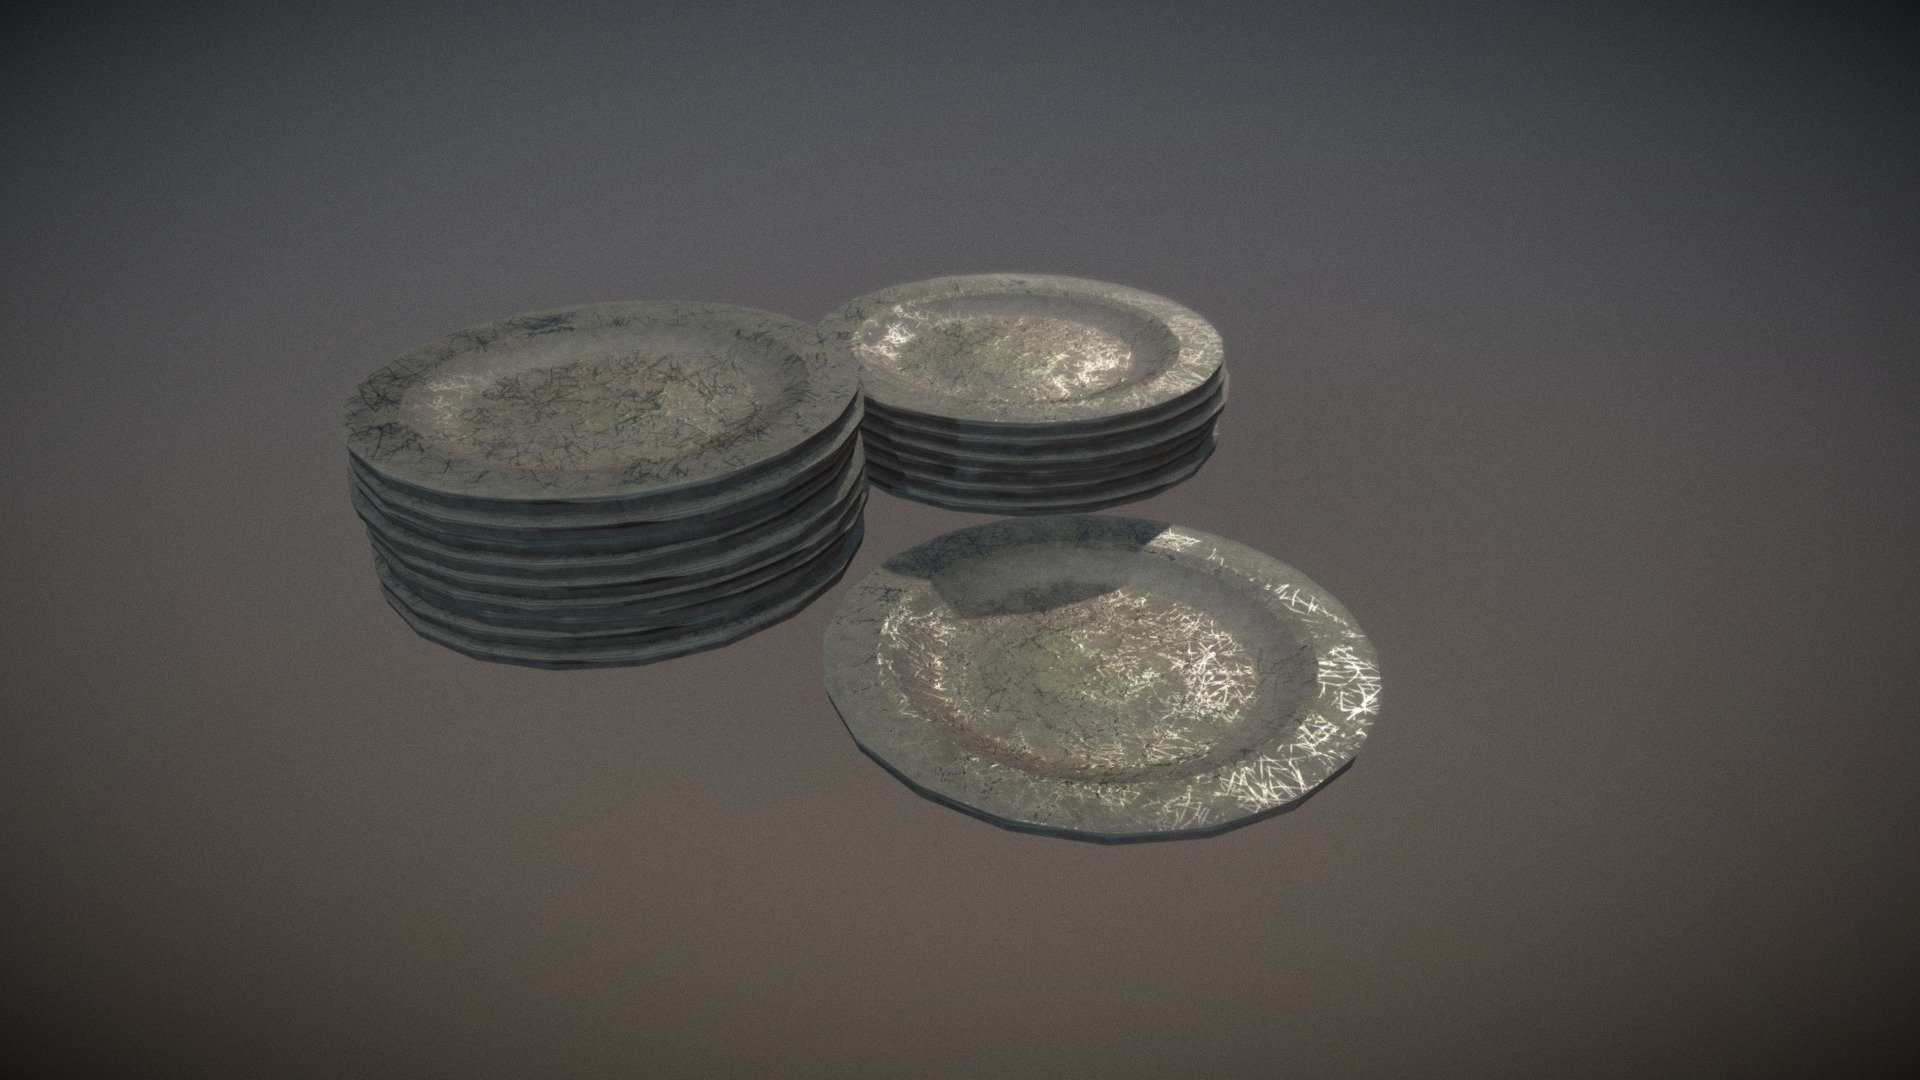 An Old Plate

LODs done by hand at 50% increments

Part of the “Old Tavern” set - https://goo.gl/KuknSf Part of the “Old” series - https://goo.gl/XWypwo - Old Plate - Buy Royalty Free 3D model by inedible.red (@inediblered) 3d model